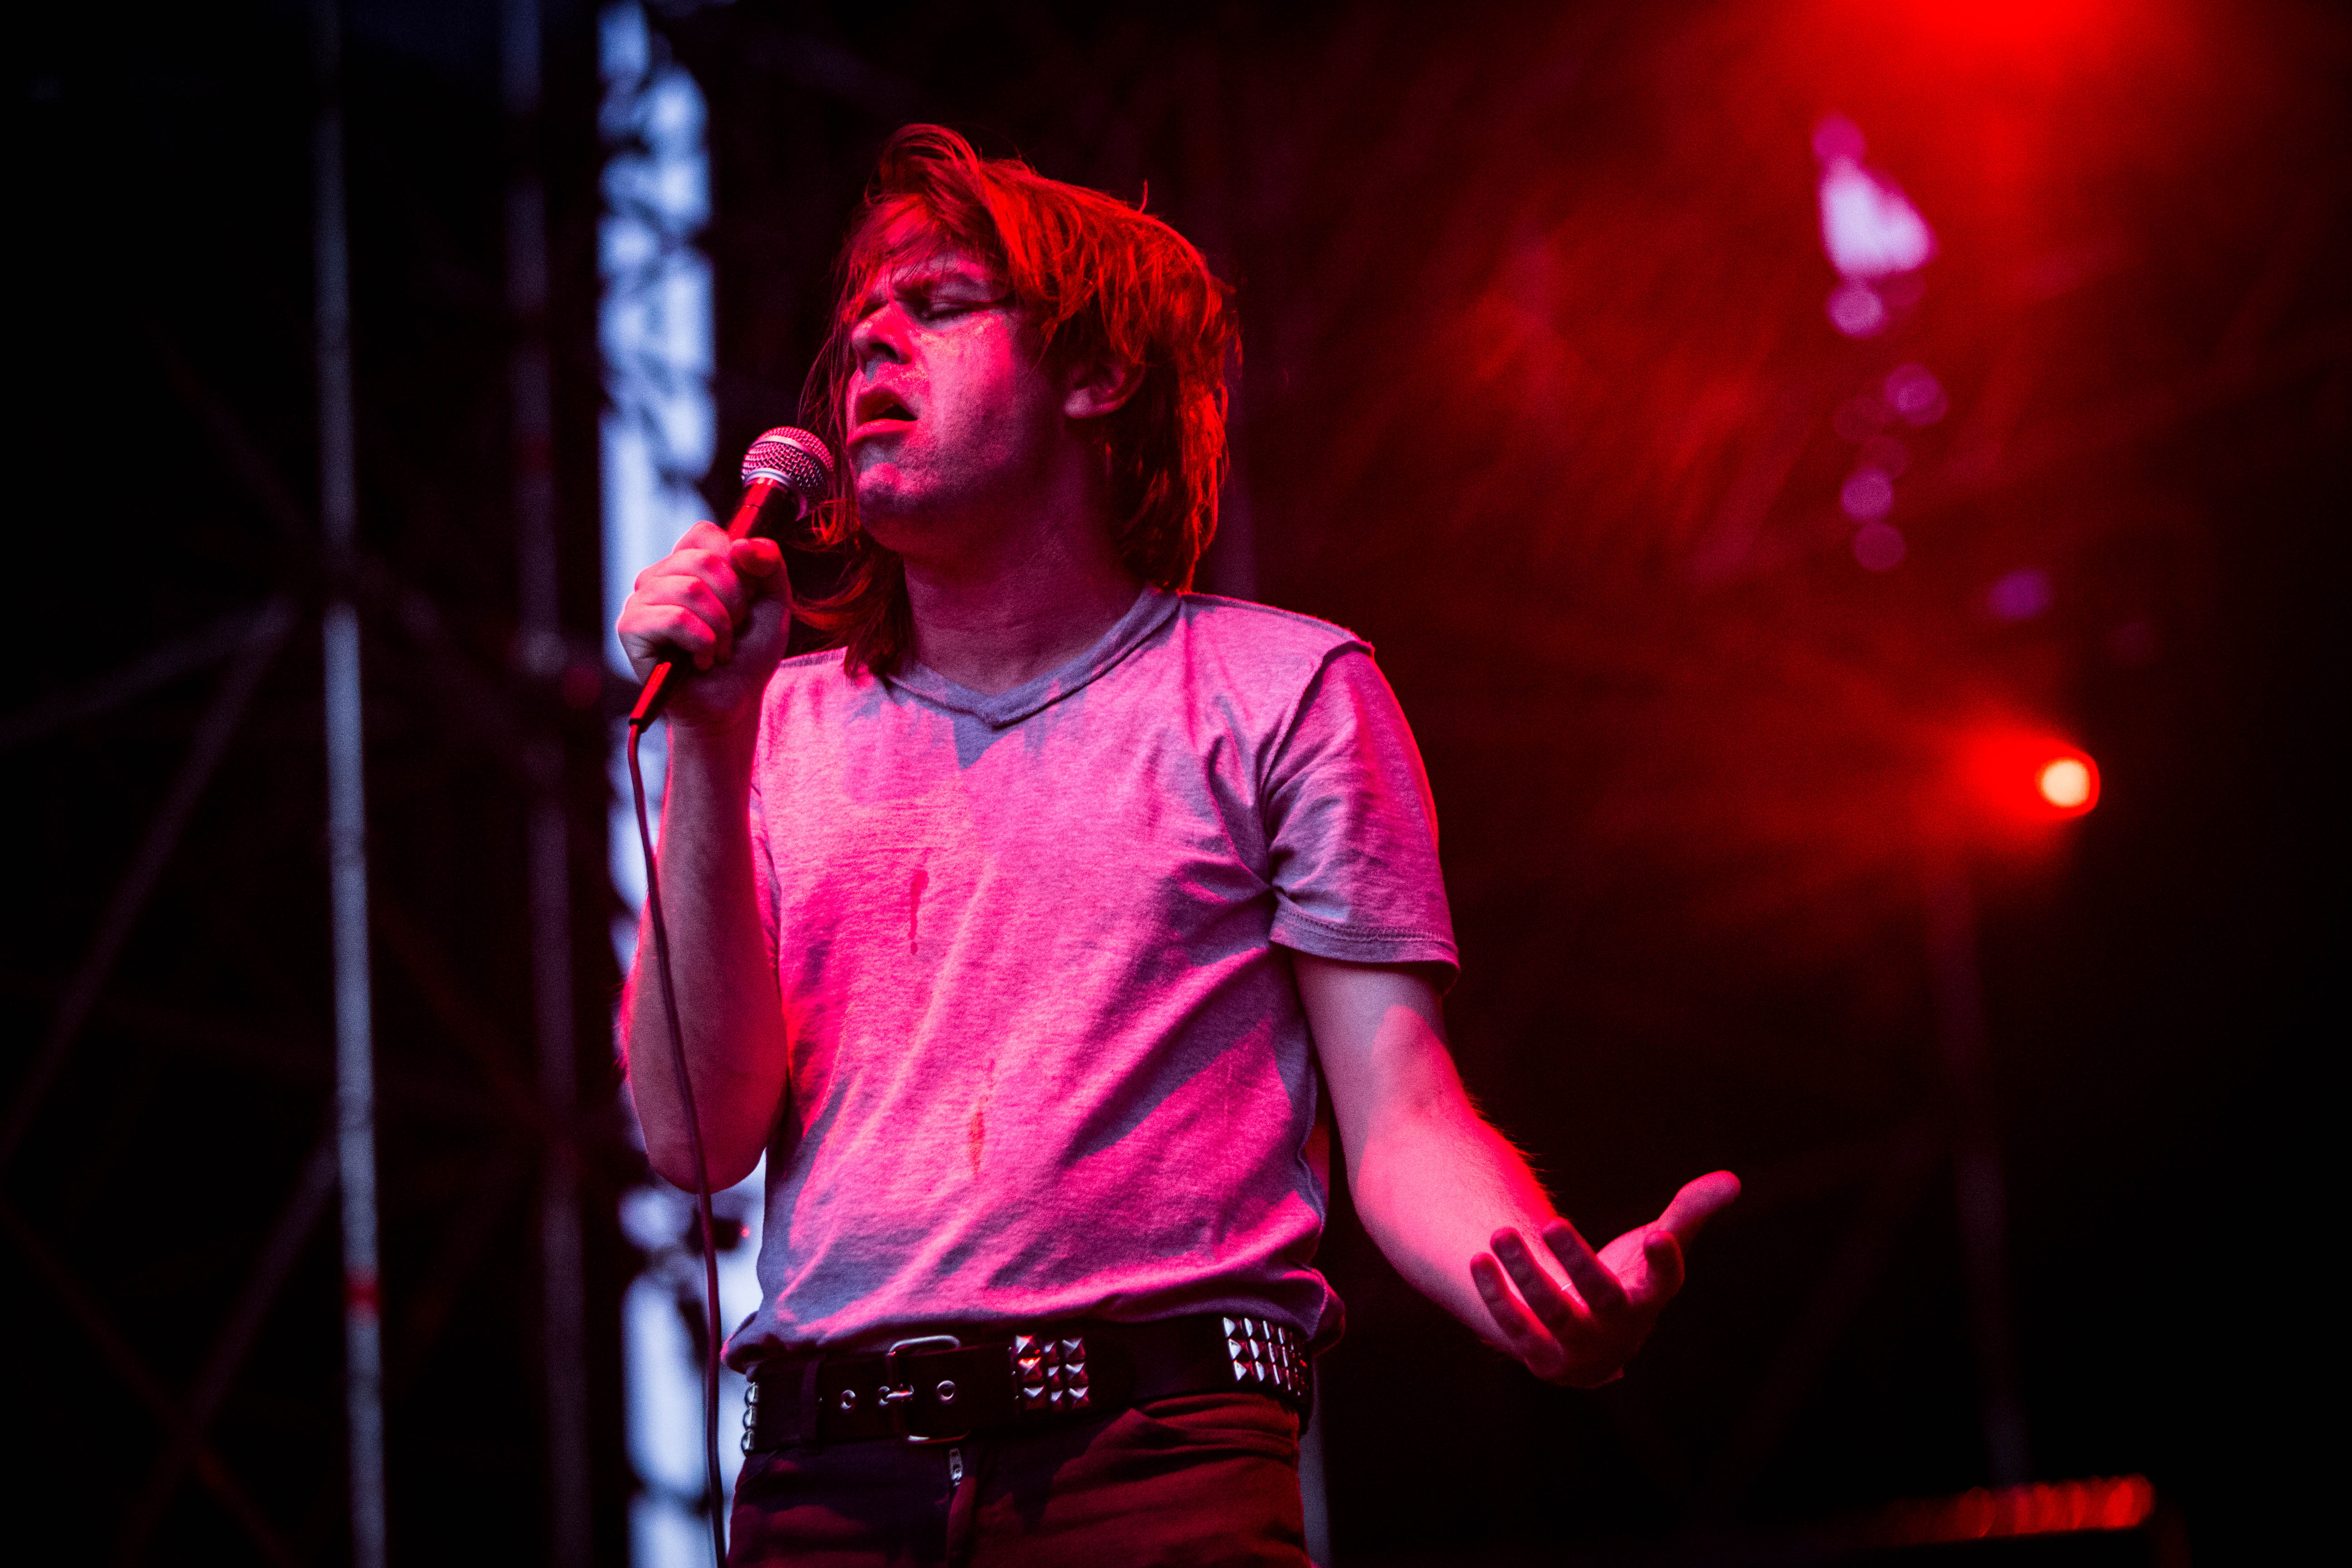 Ariel Pink - "Stray Here With You" & "So Glad" (2019 Rework)